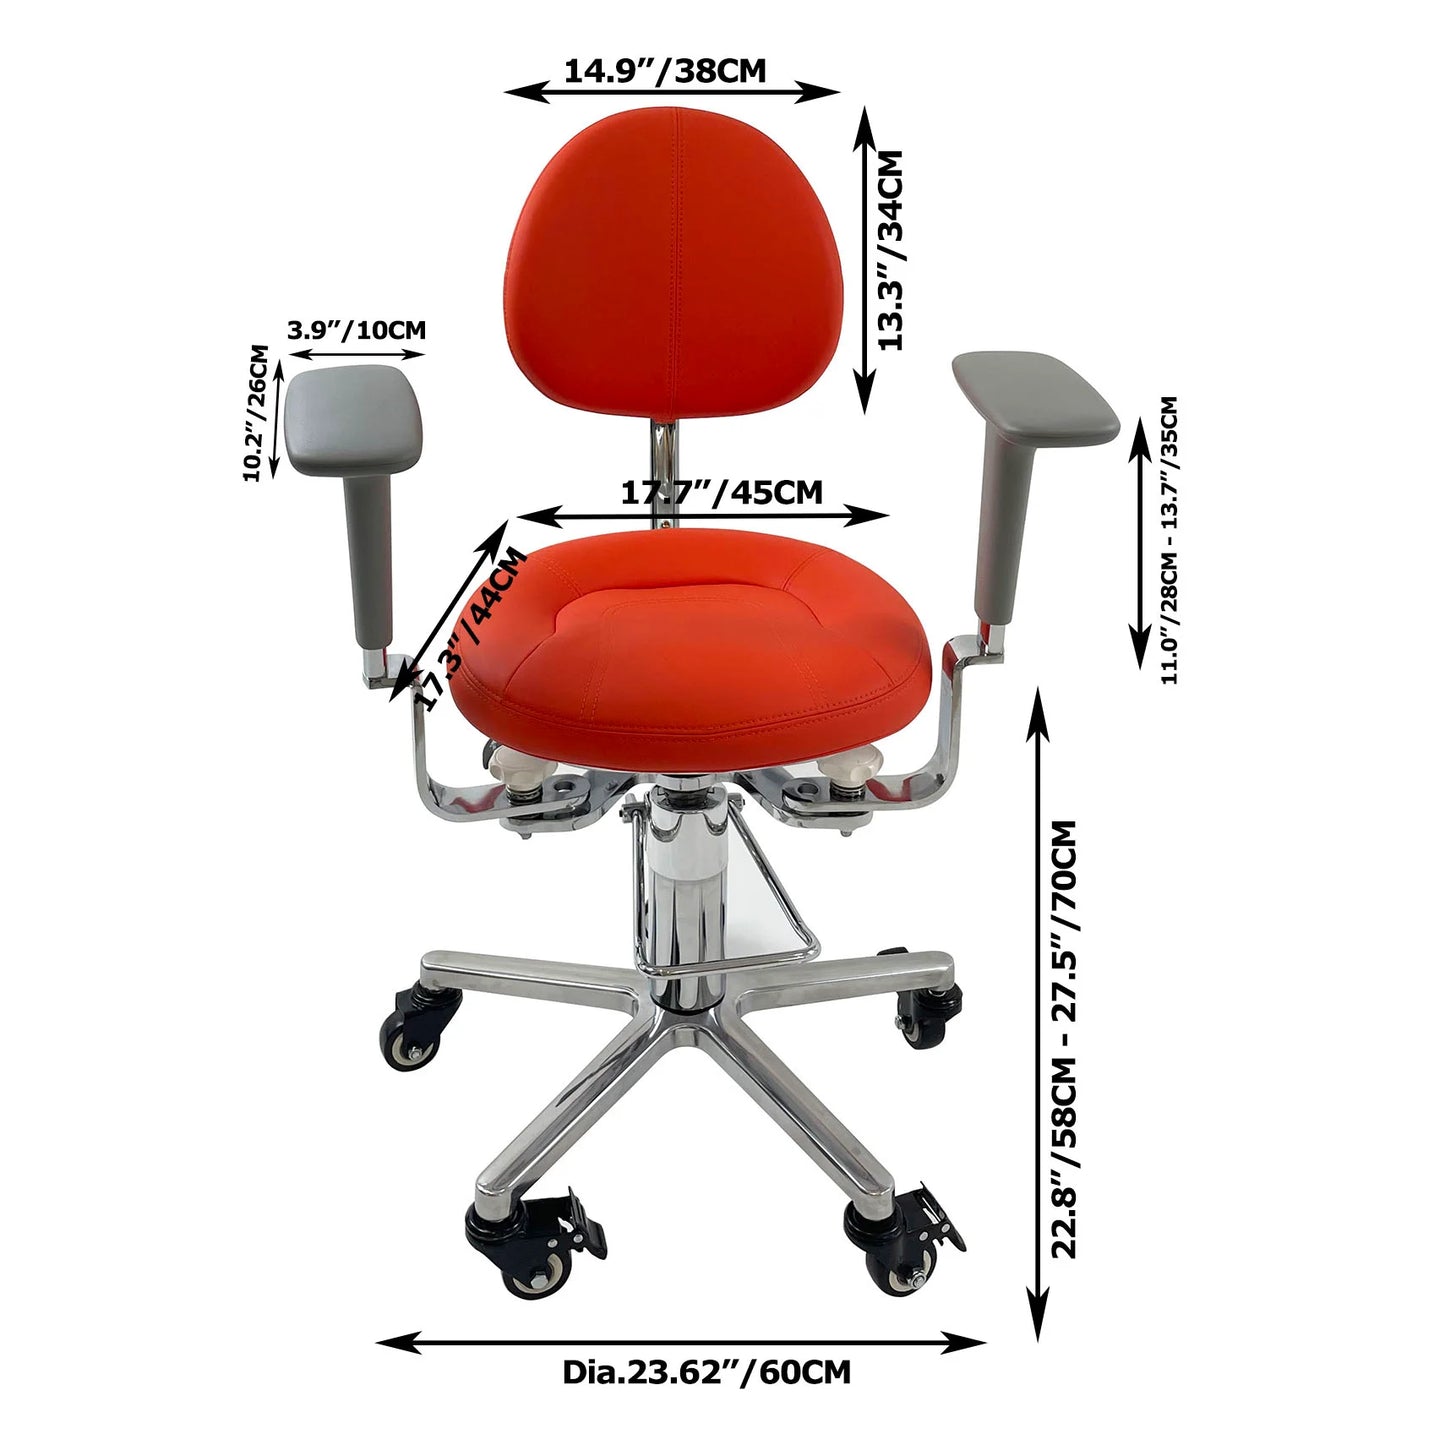 hydraulic red surgical chair dimension